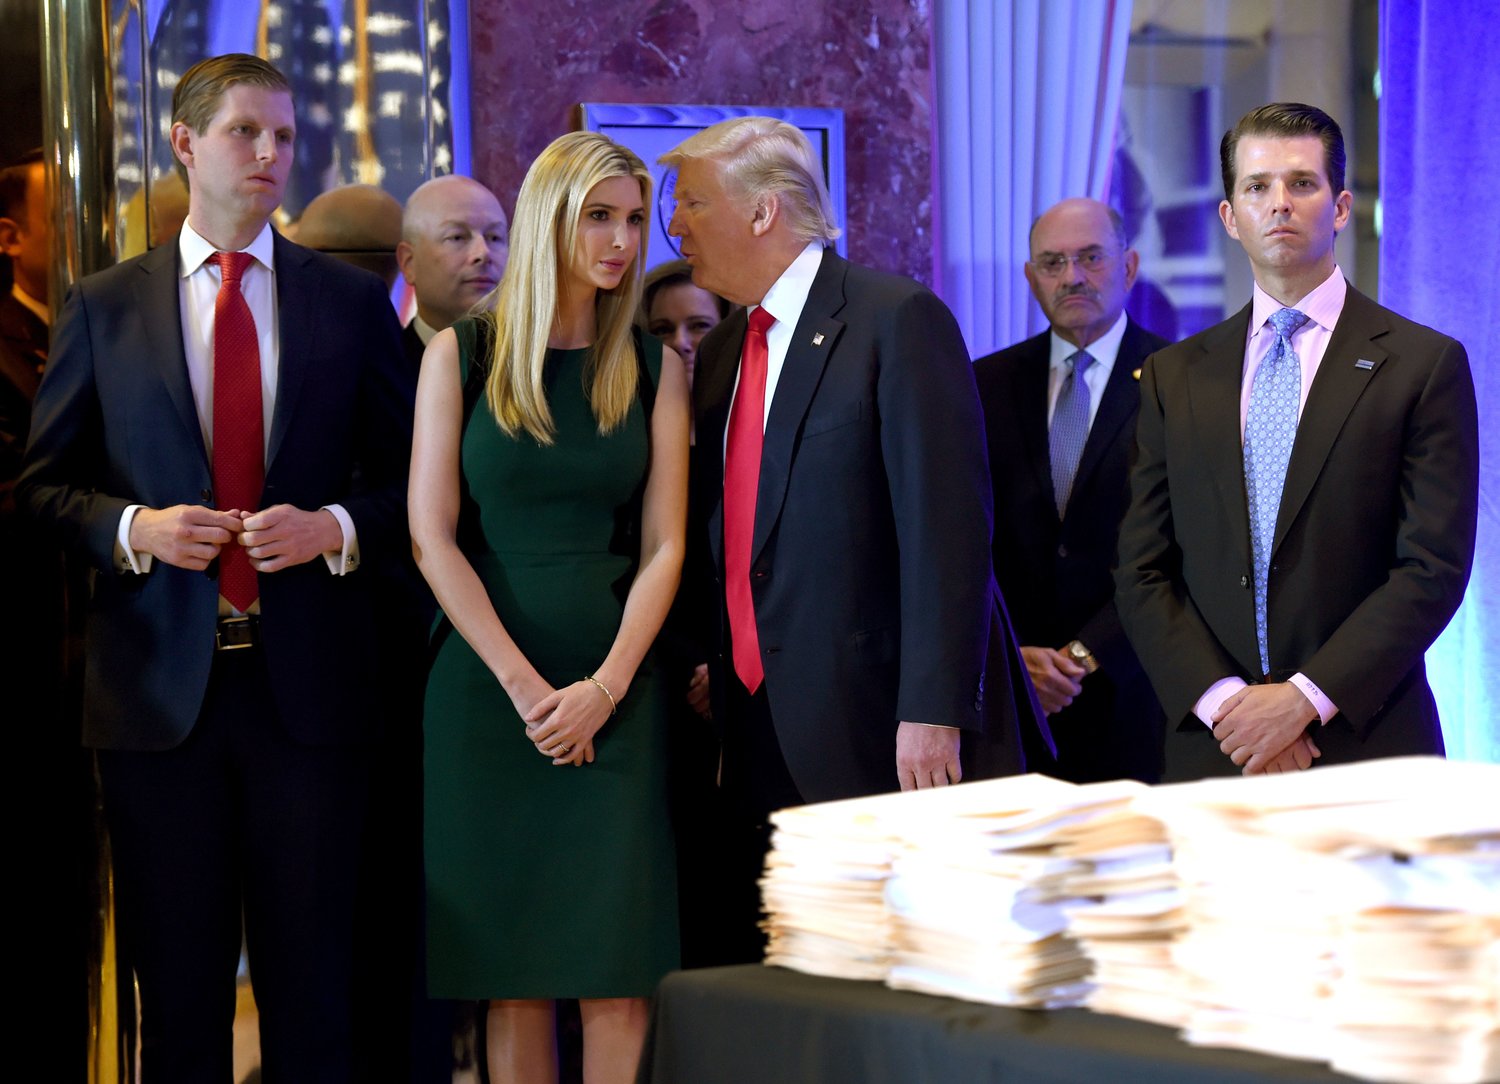 In this file photo from Jan. 11, 2017, Donald Trump along with his children Eric, left, Ivanka and Donald Jr. arrive for a news conference at Trump Tower in New York, accompanied by Allen Weisselberg, second from right, the chief financial officer of the Trump Organization.(Timothy A. Clary/AFP/Getty Images/TNS)